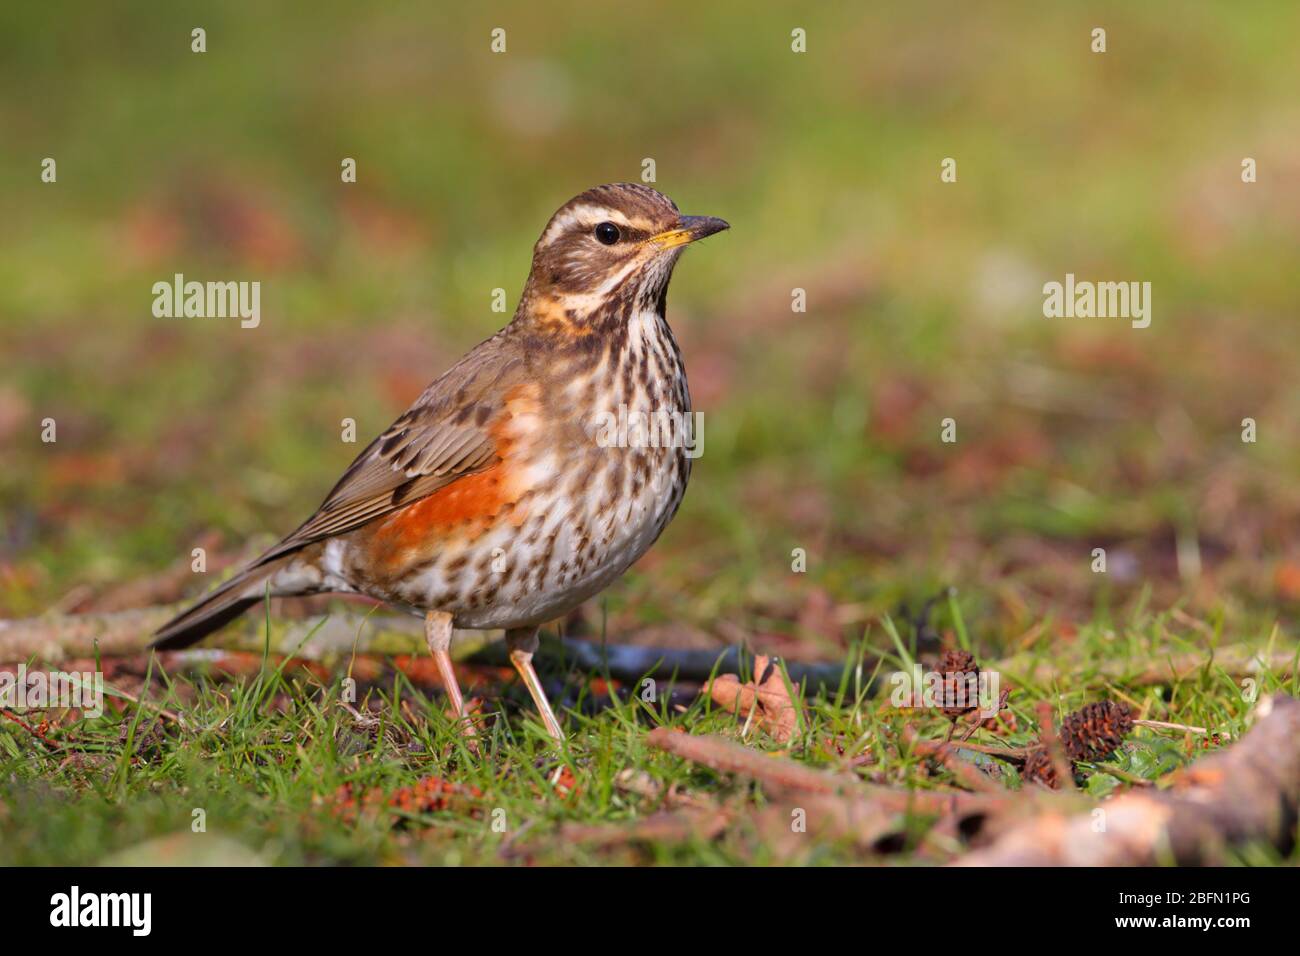 An adult Redwing (Turdus iliacus), a small thrush species and winter visitor to the UK, feeding on the ground in a park in England Stock Photo